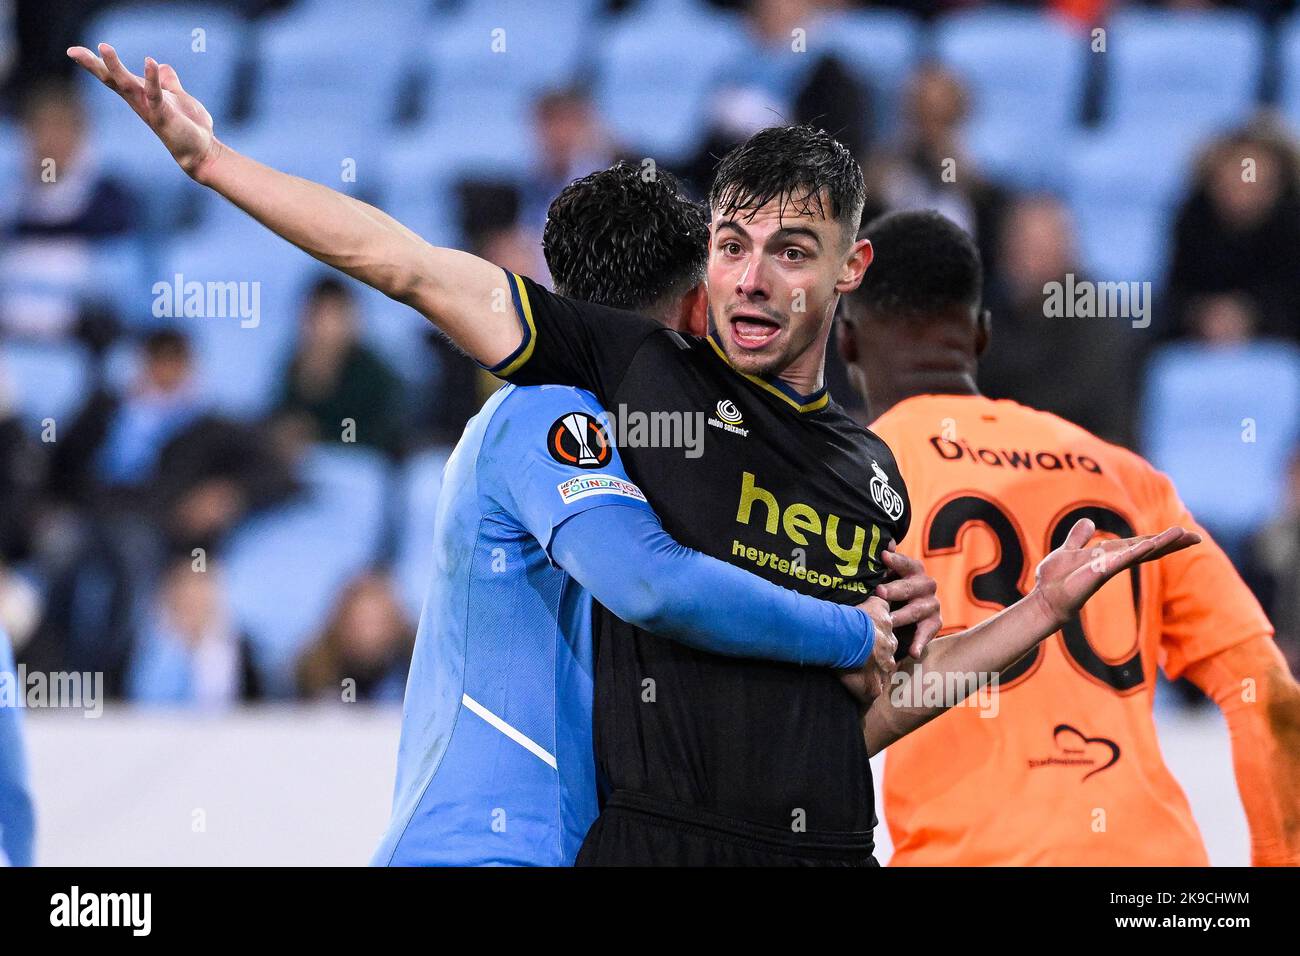 Union's Dante Vanzeir reacts during a soccer game between Swedish Malmo Fotbollforening and Belgian Royale Union Saint-Gilloise, Thursday 27 October 2022 in Malmo, on day 5 of the UEFA Europa League group stage. BELGA PHOTO LAURIE DIEFFEMBACQ Credit: Belga News Agency/Alamy Live News Stock Photo